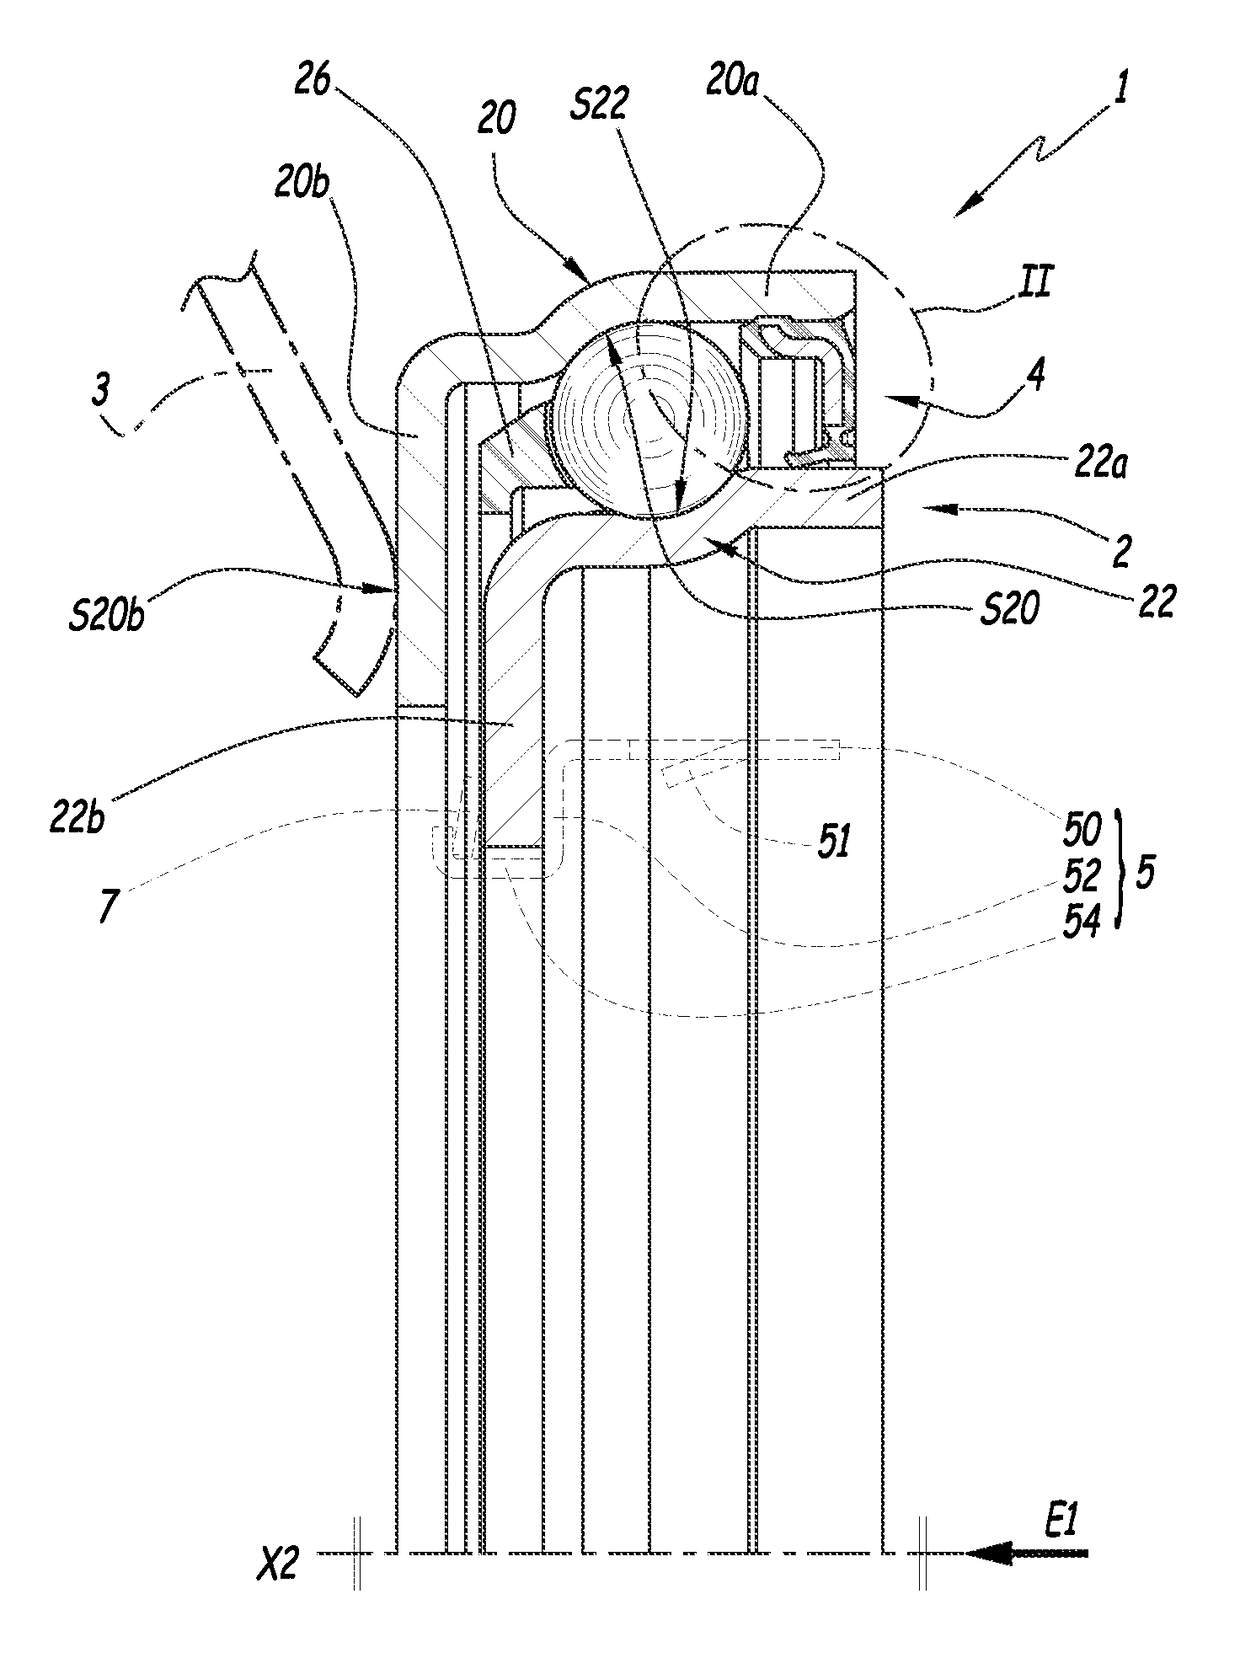 Engagement-disengagement, suspension or steering release bearing, and motor vehicle equipped with such a release bearing